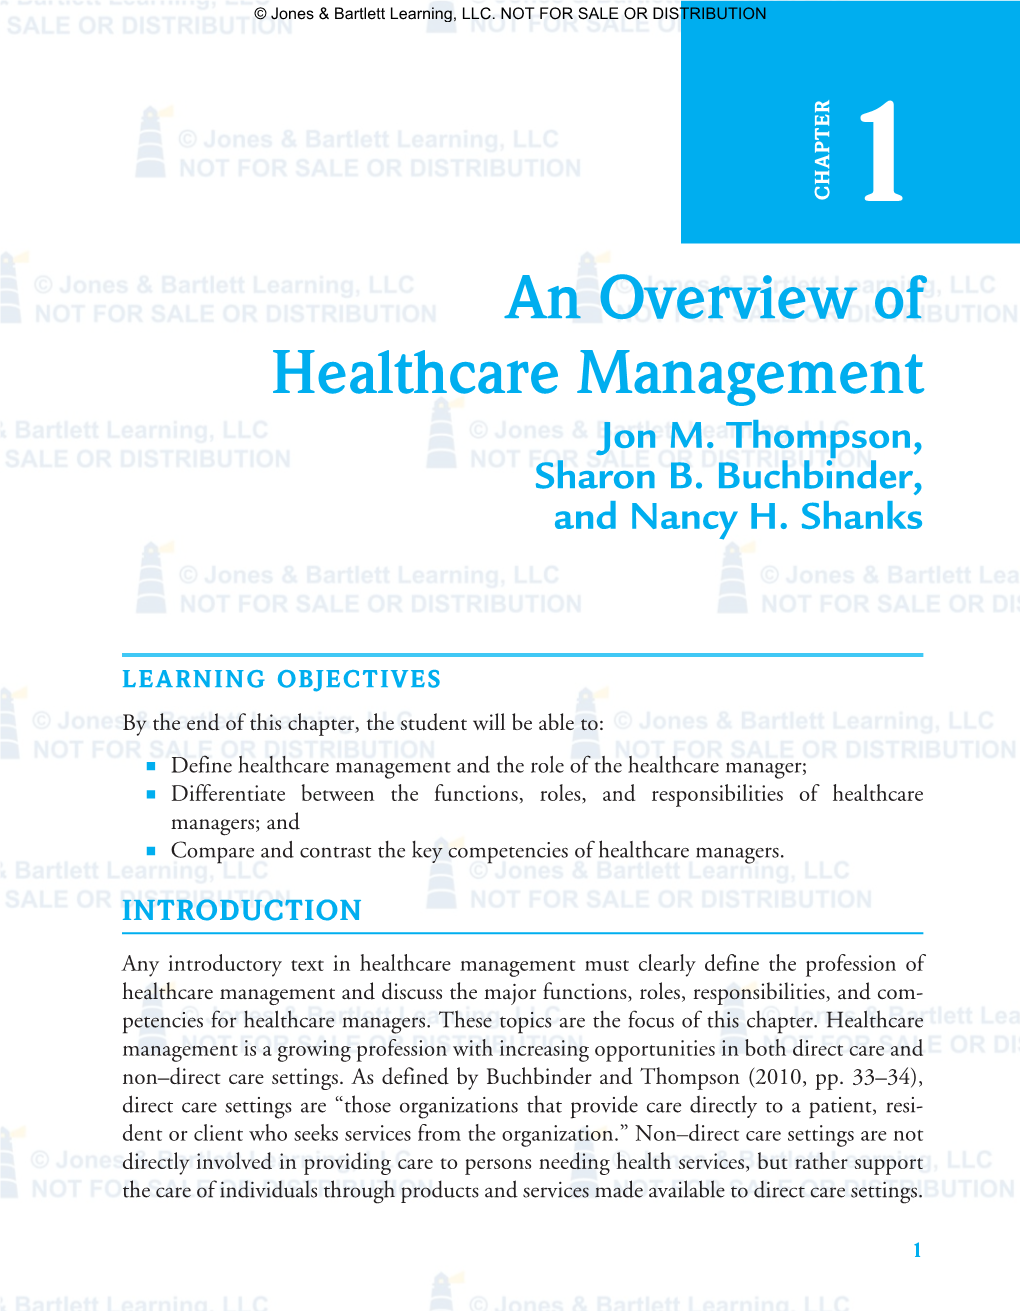 An Overview of Healthcare Management